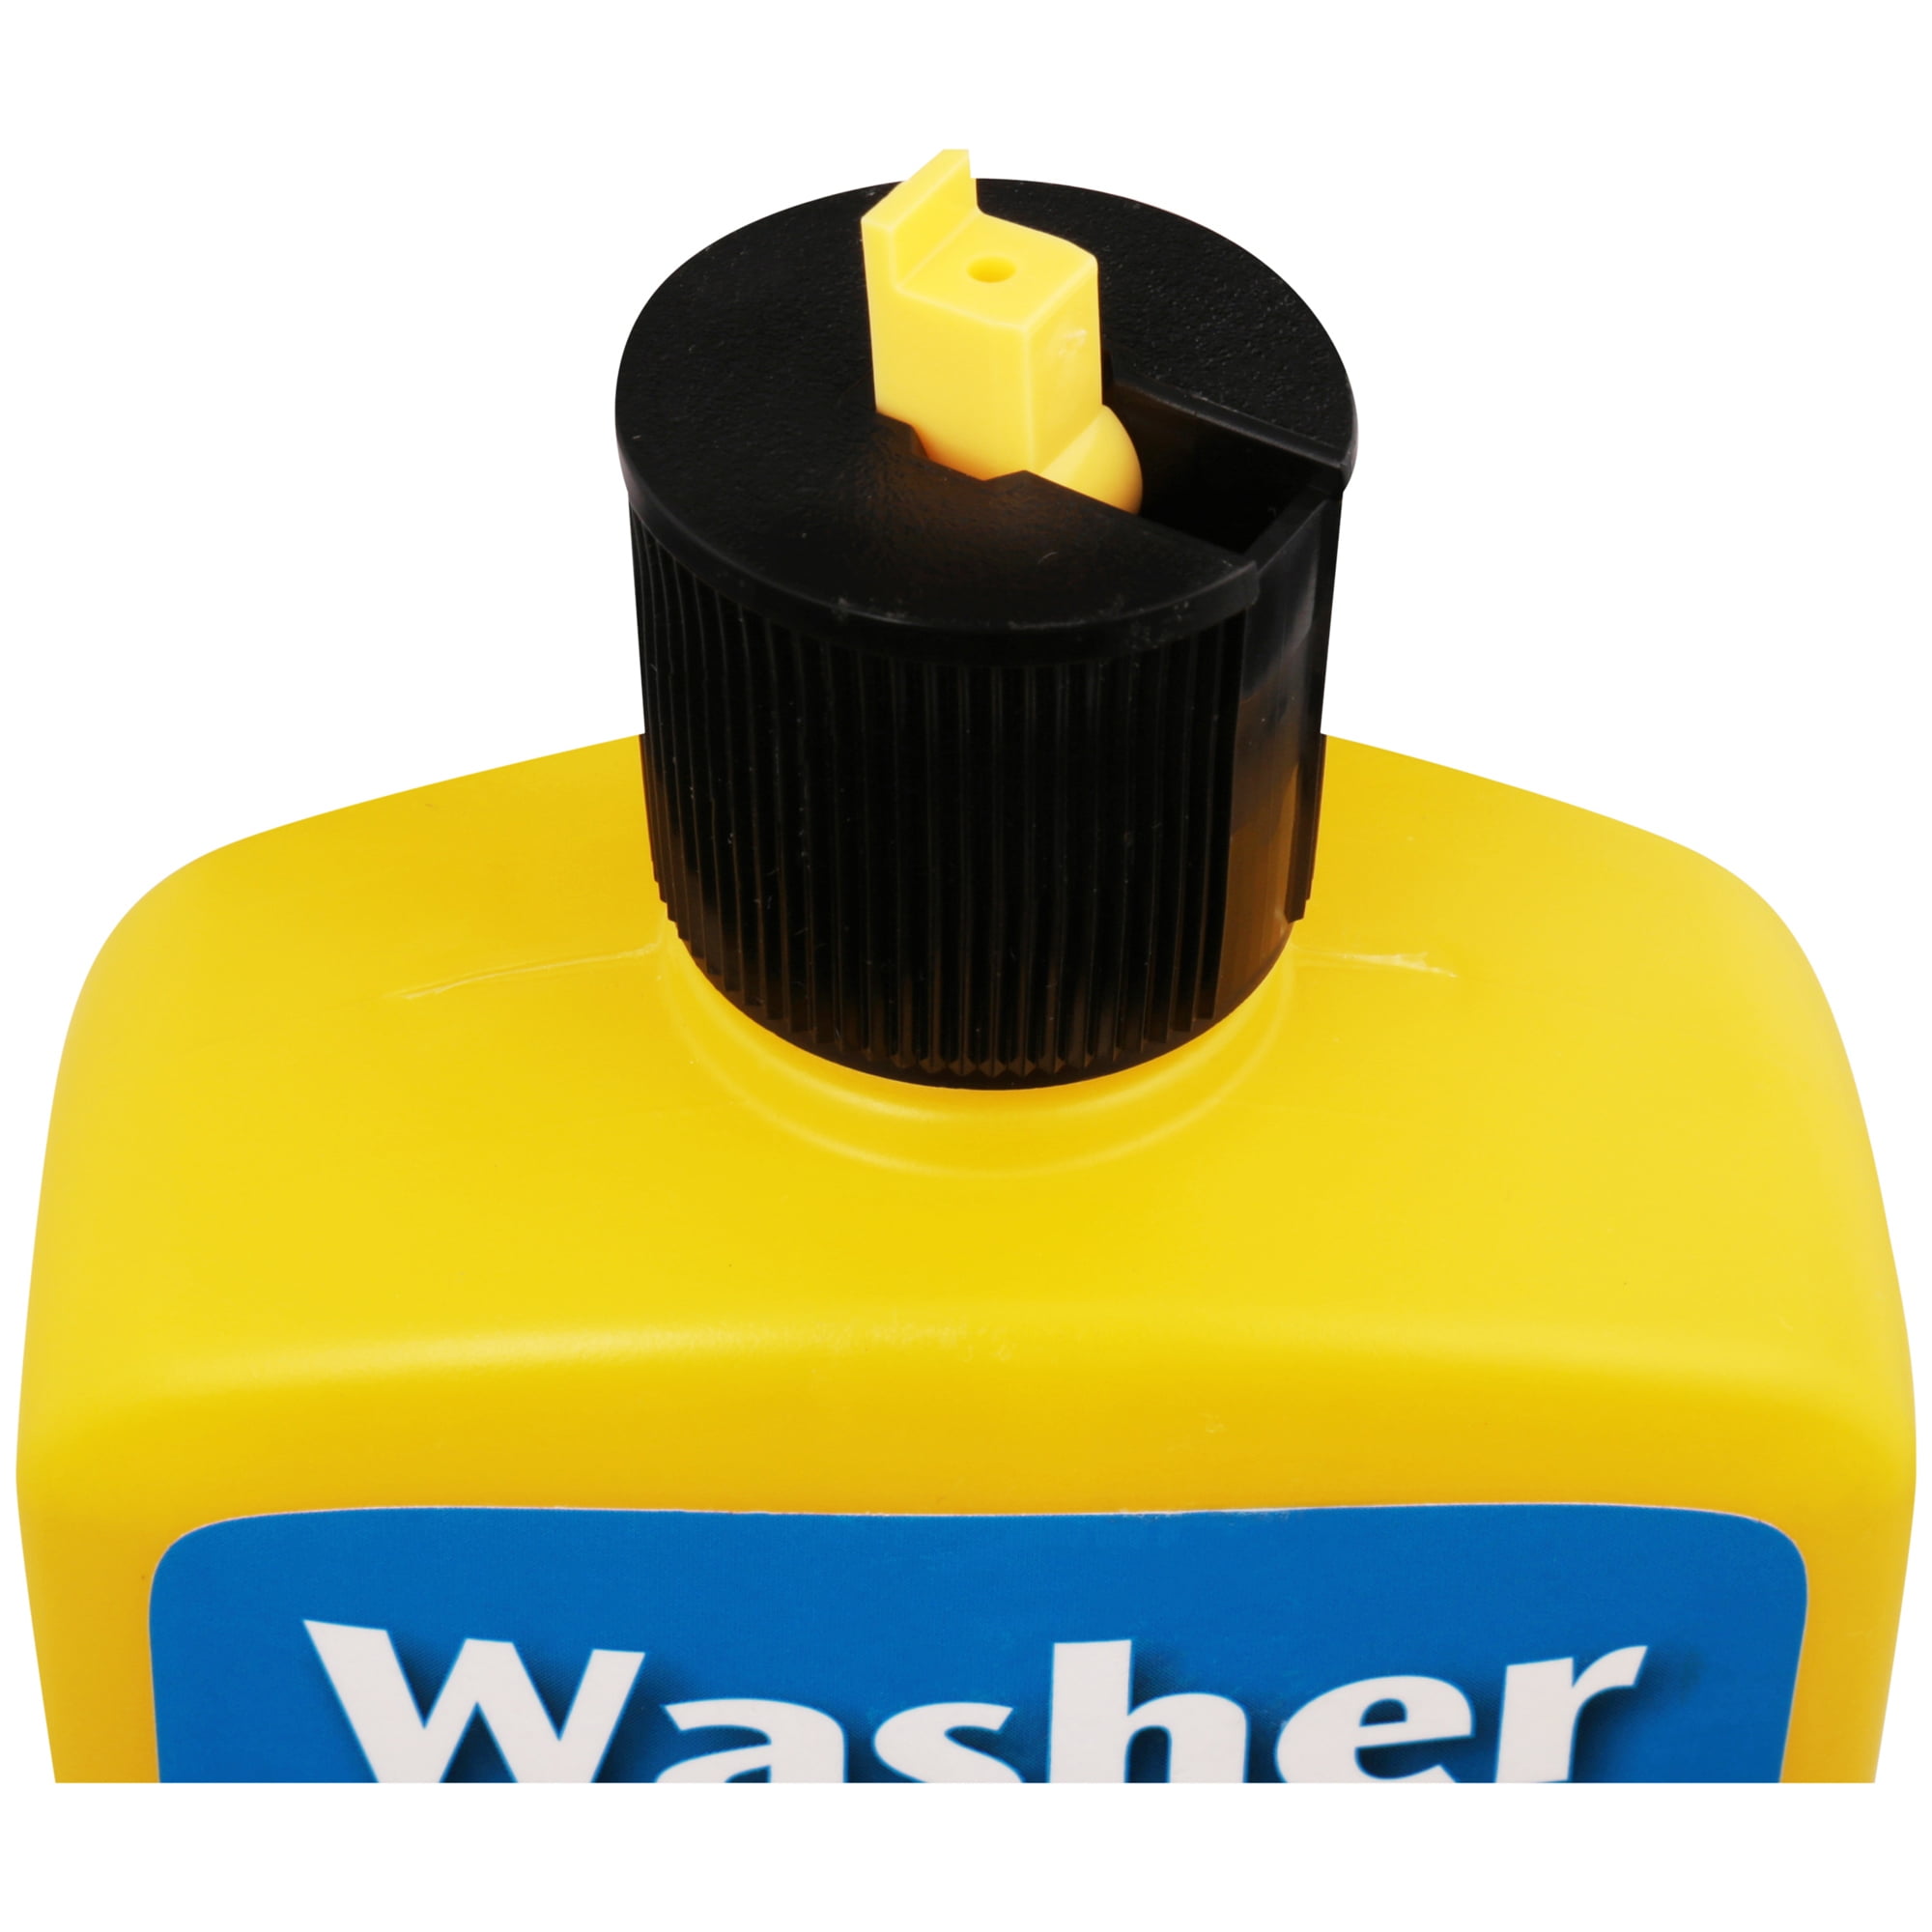 Rain-X De-Icer Windshield Washer Fluid Possibly Only $1 at Walmart